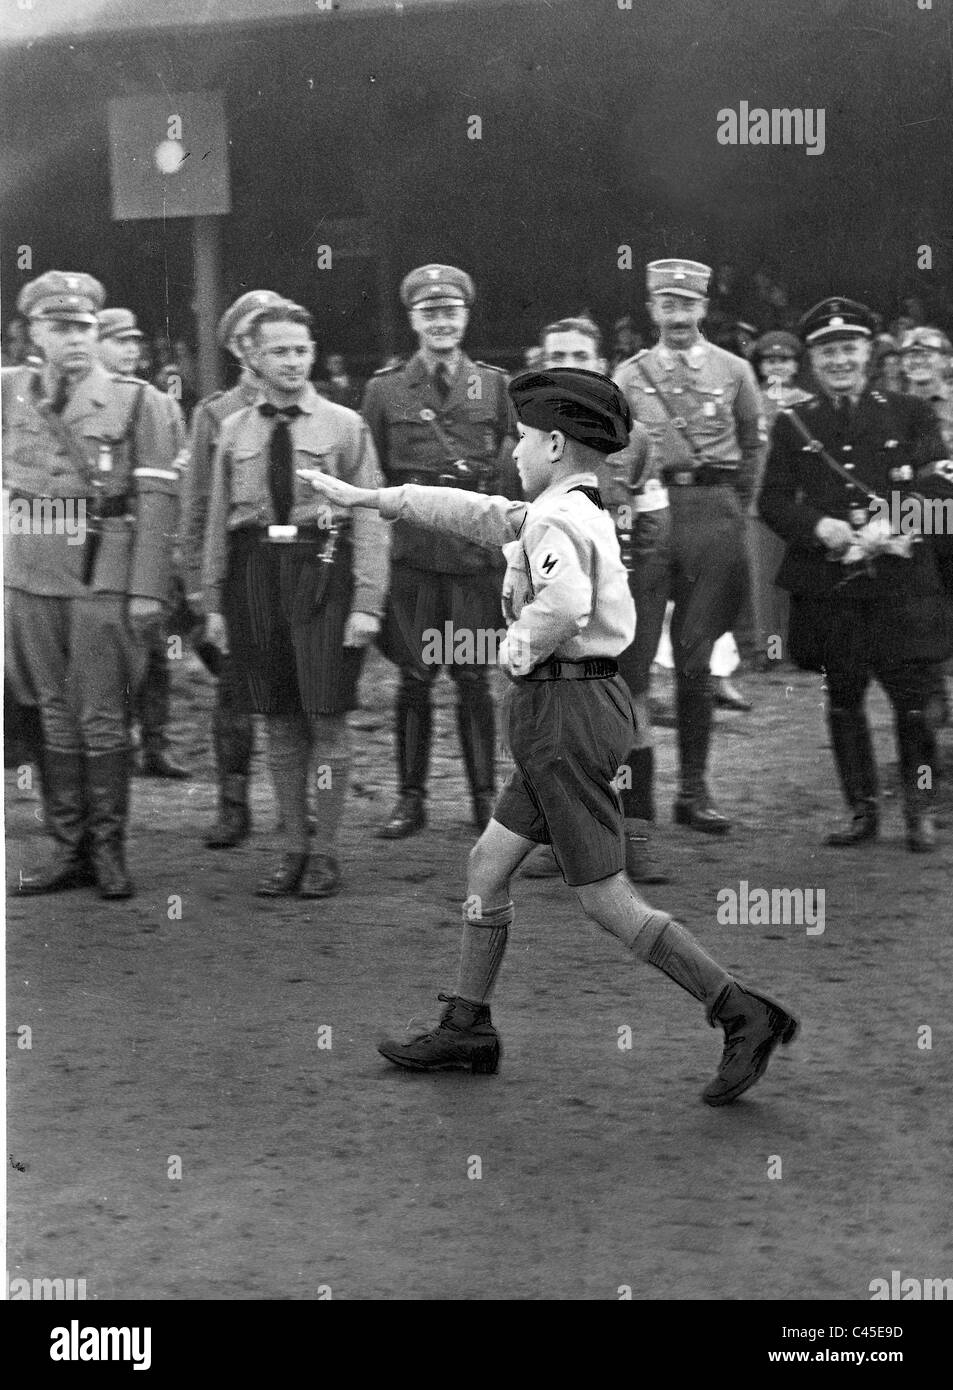 'Pimpf' of the German Youth in Danzig, 1934 Stock Photo